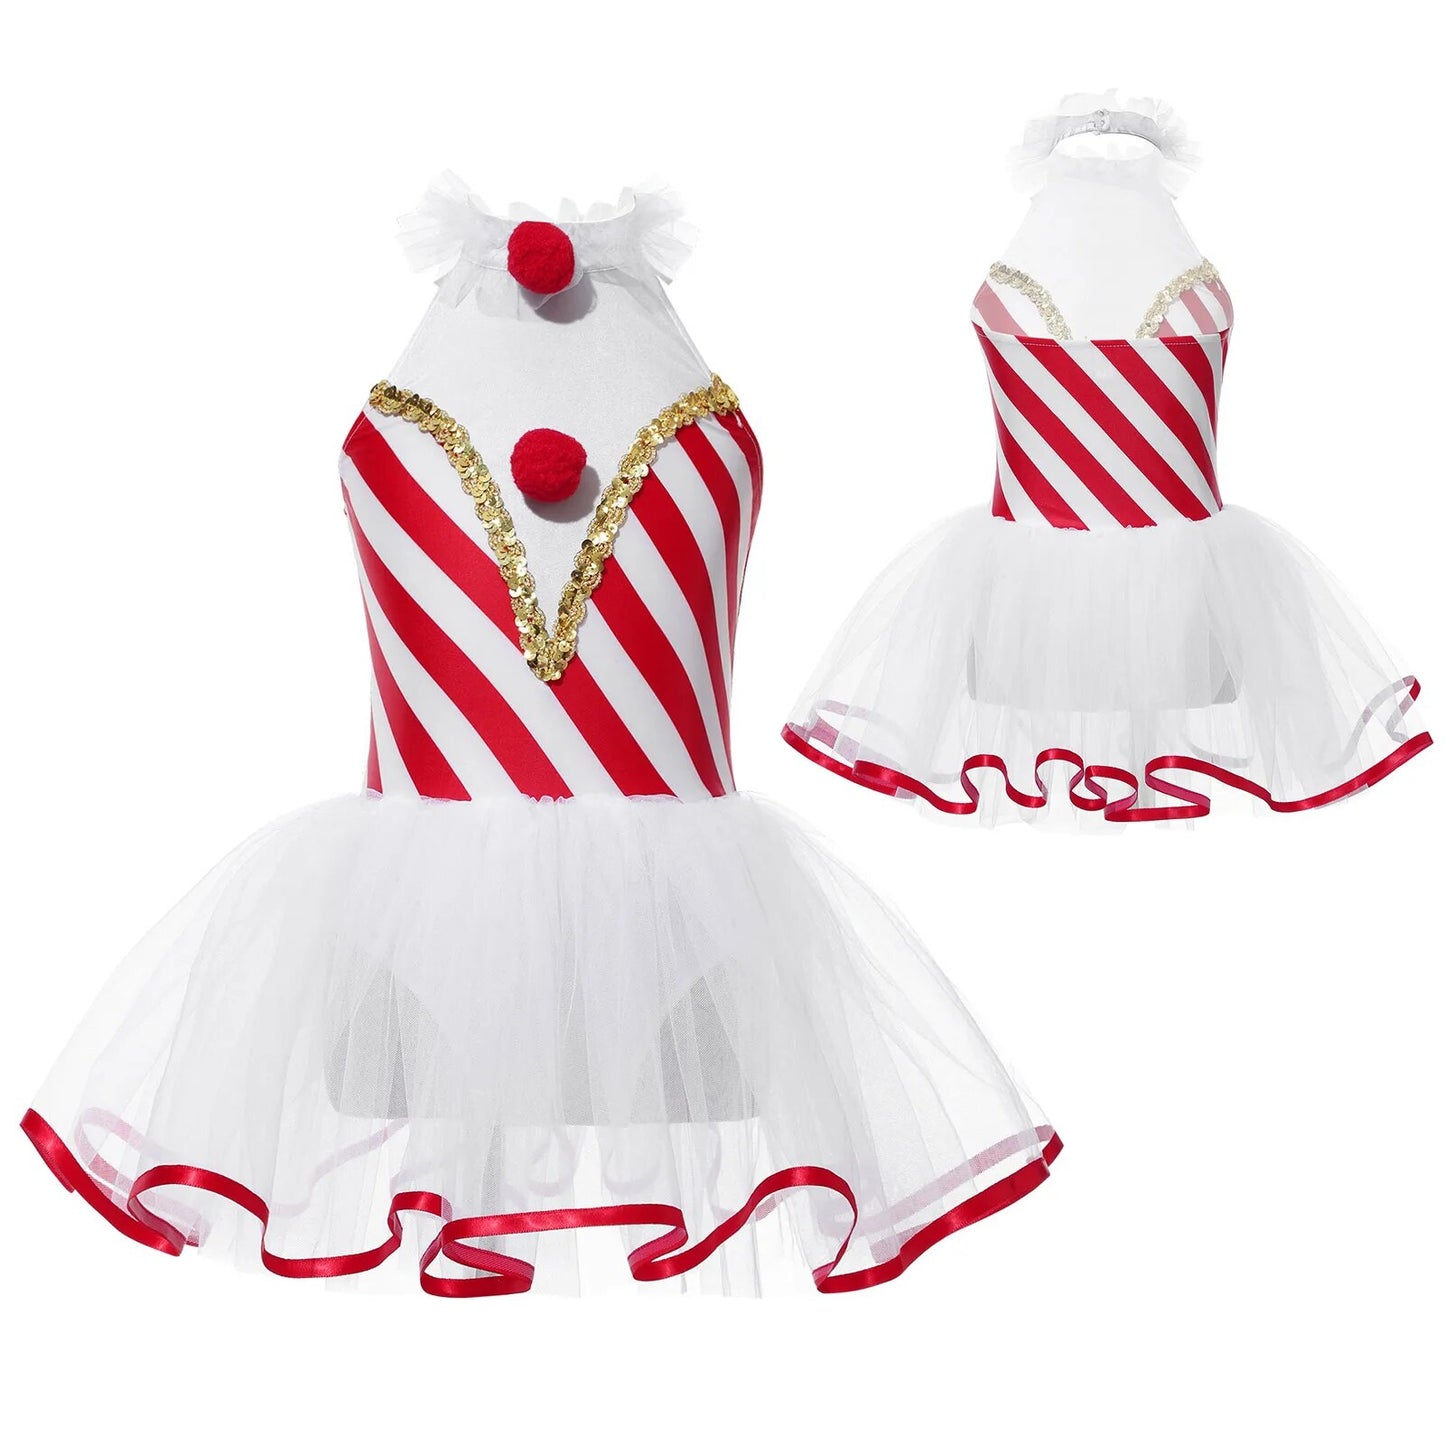 It's a match! Stripe right on this candy cane-inspired Dream